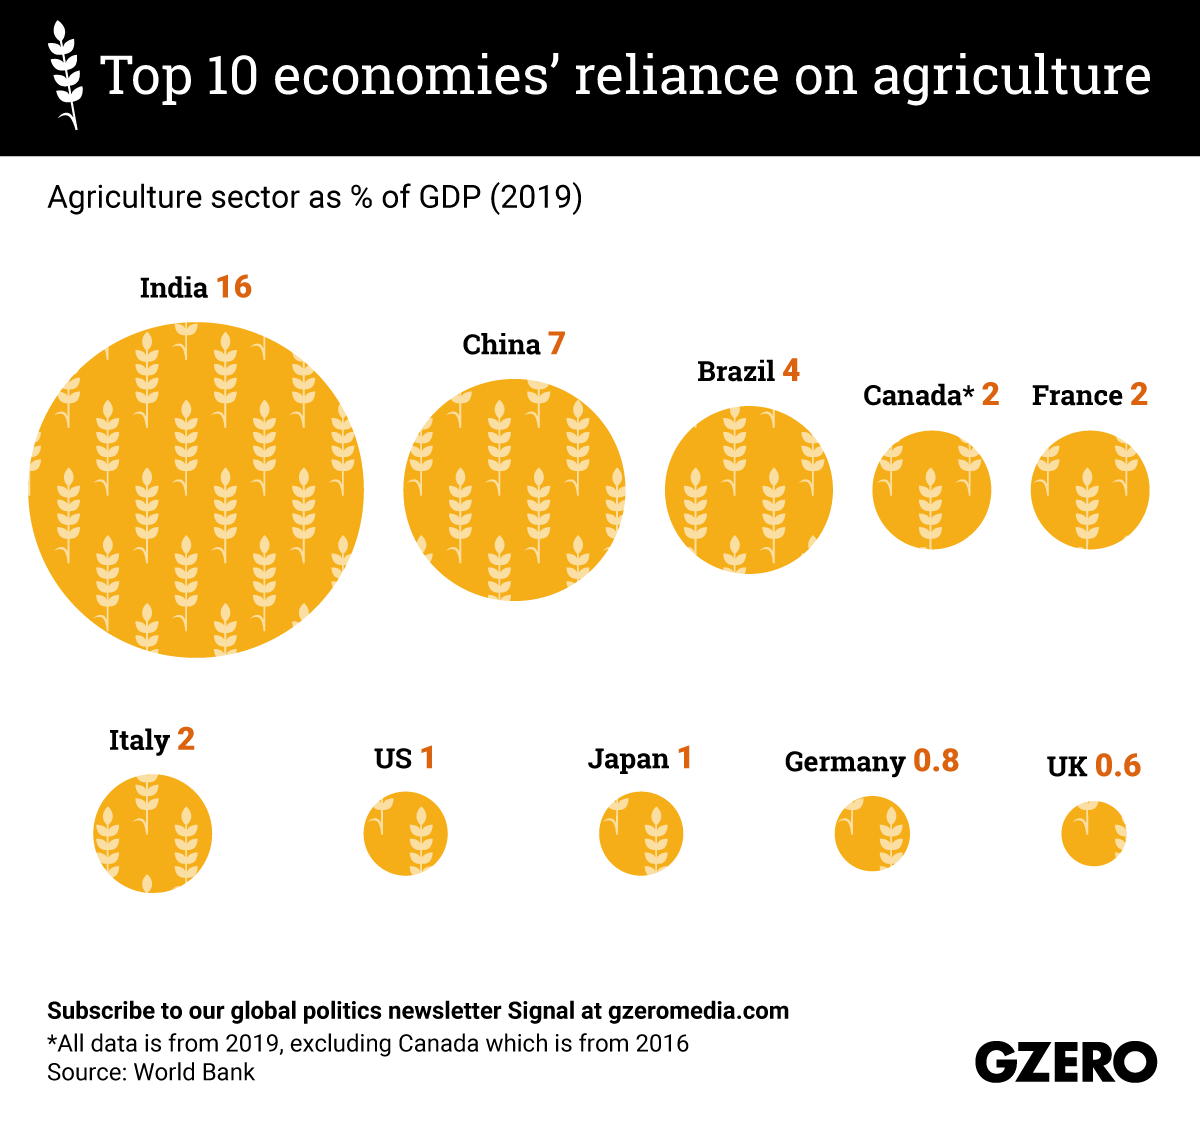 The Graphic Truth: Top 10 economies' reliance on agriculture